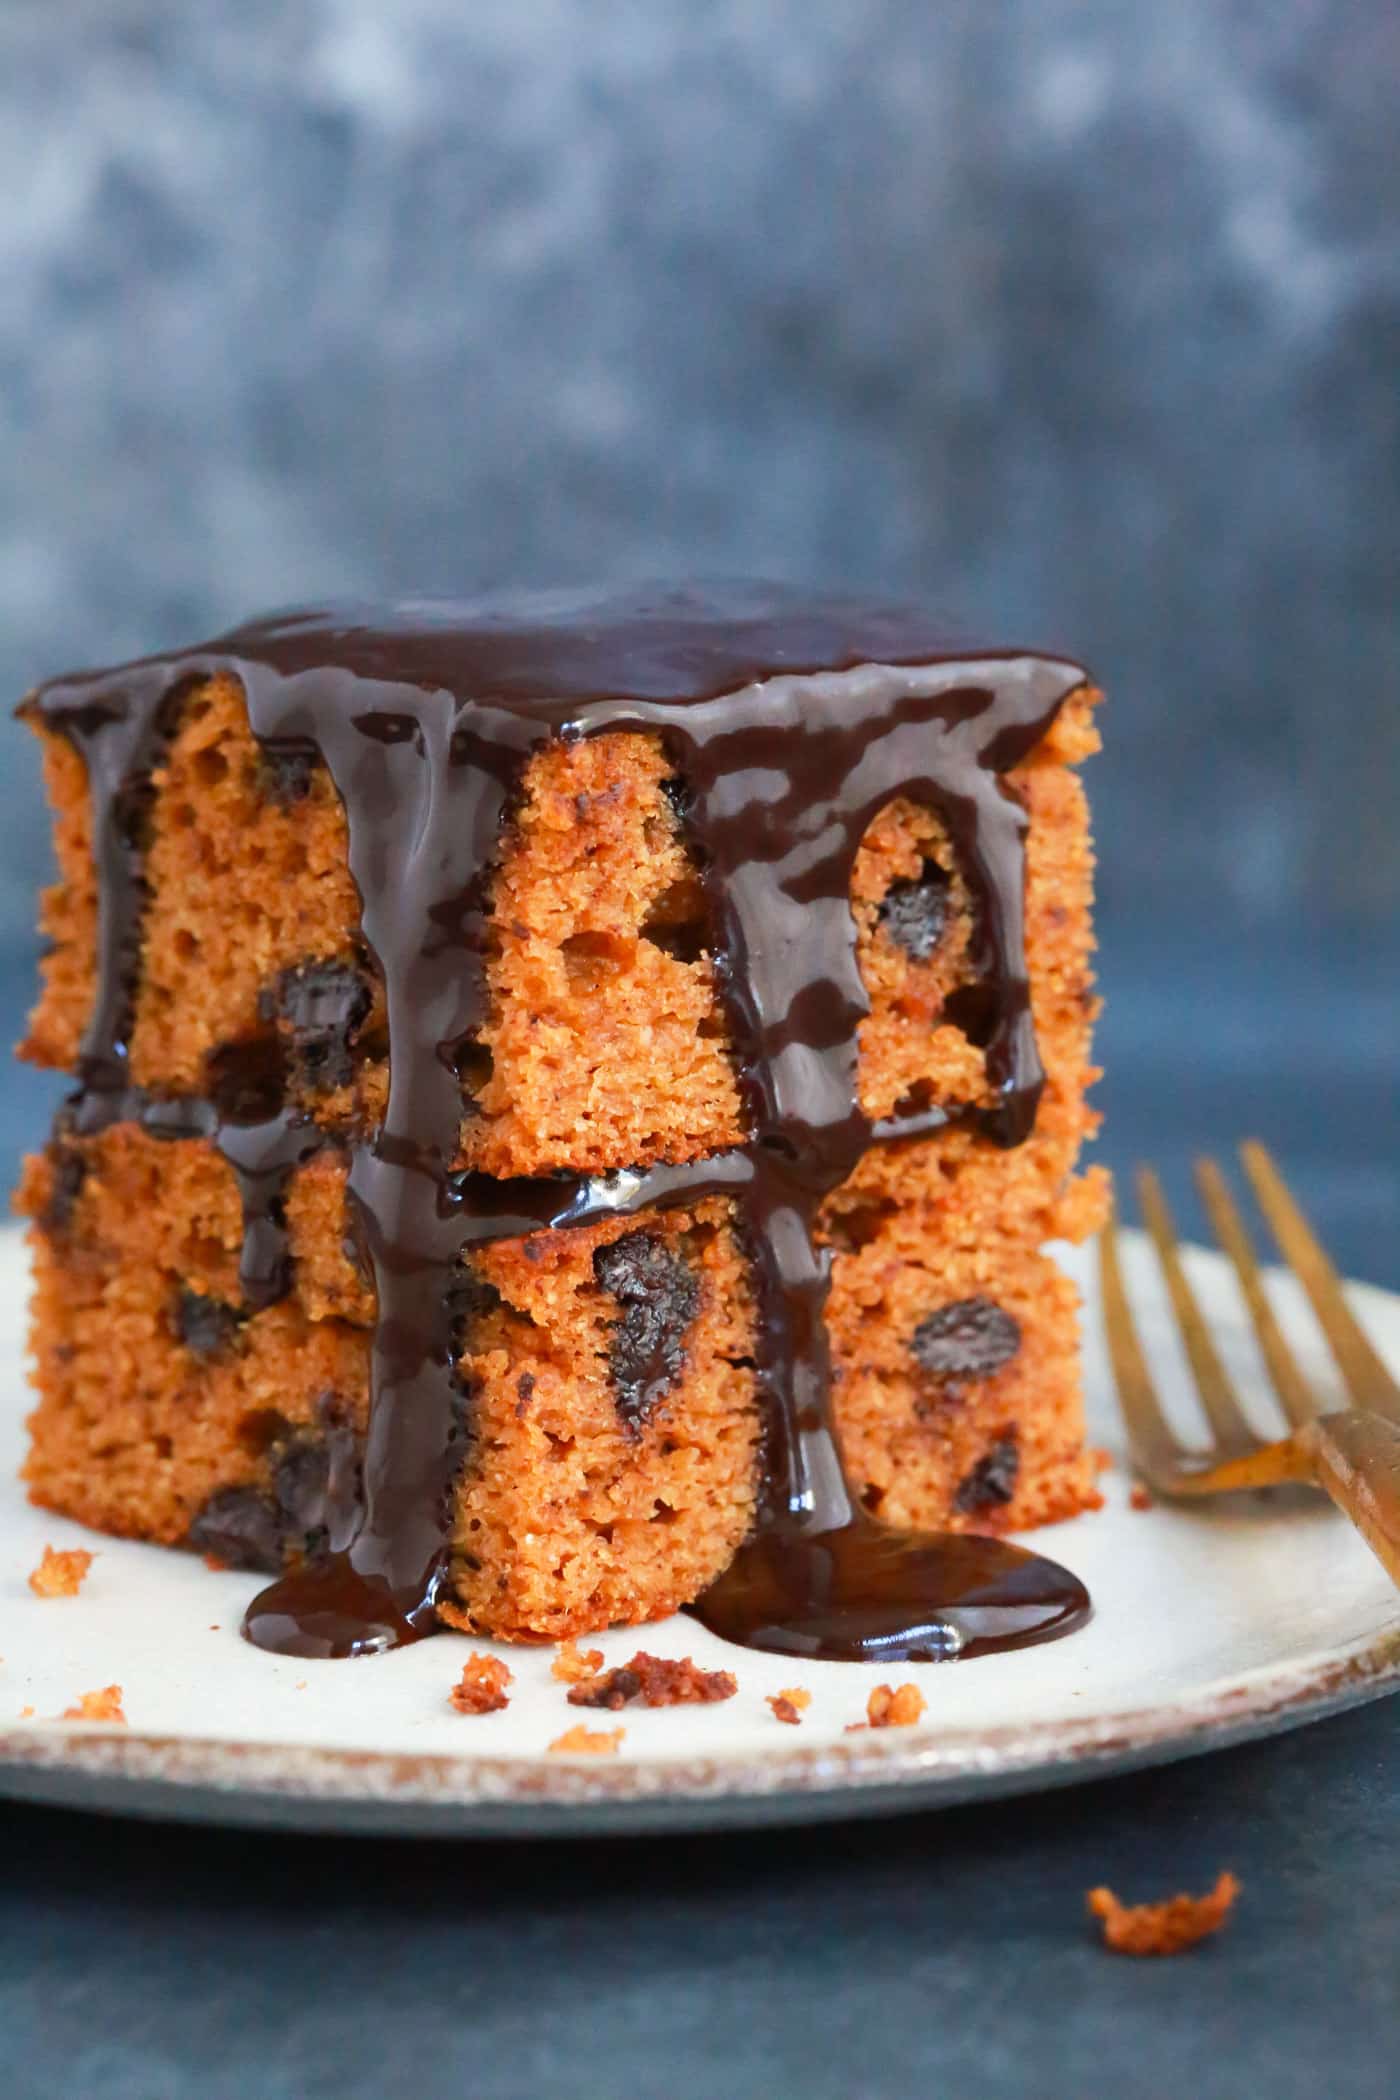  You’ll never believe that this super moist and rich paleo chocolate pumpkin cake is actually healthy. It’s gluten-free and made with peanut butter, almond flour, pumpkin puree and coconut milk. 